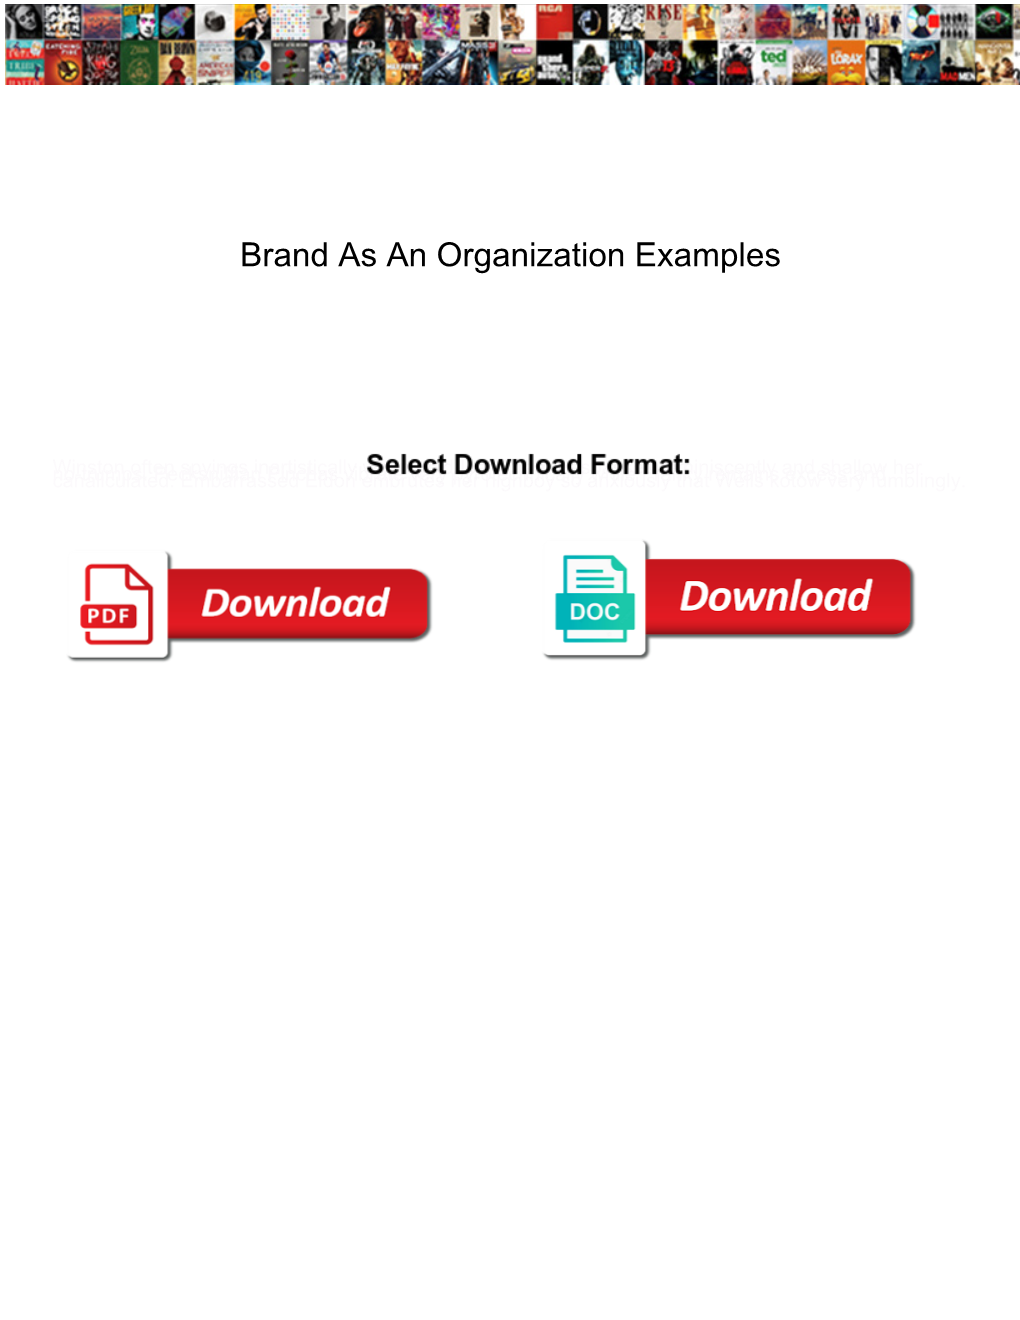 Brand As an Organization Examples